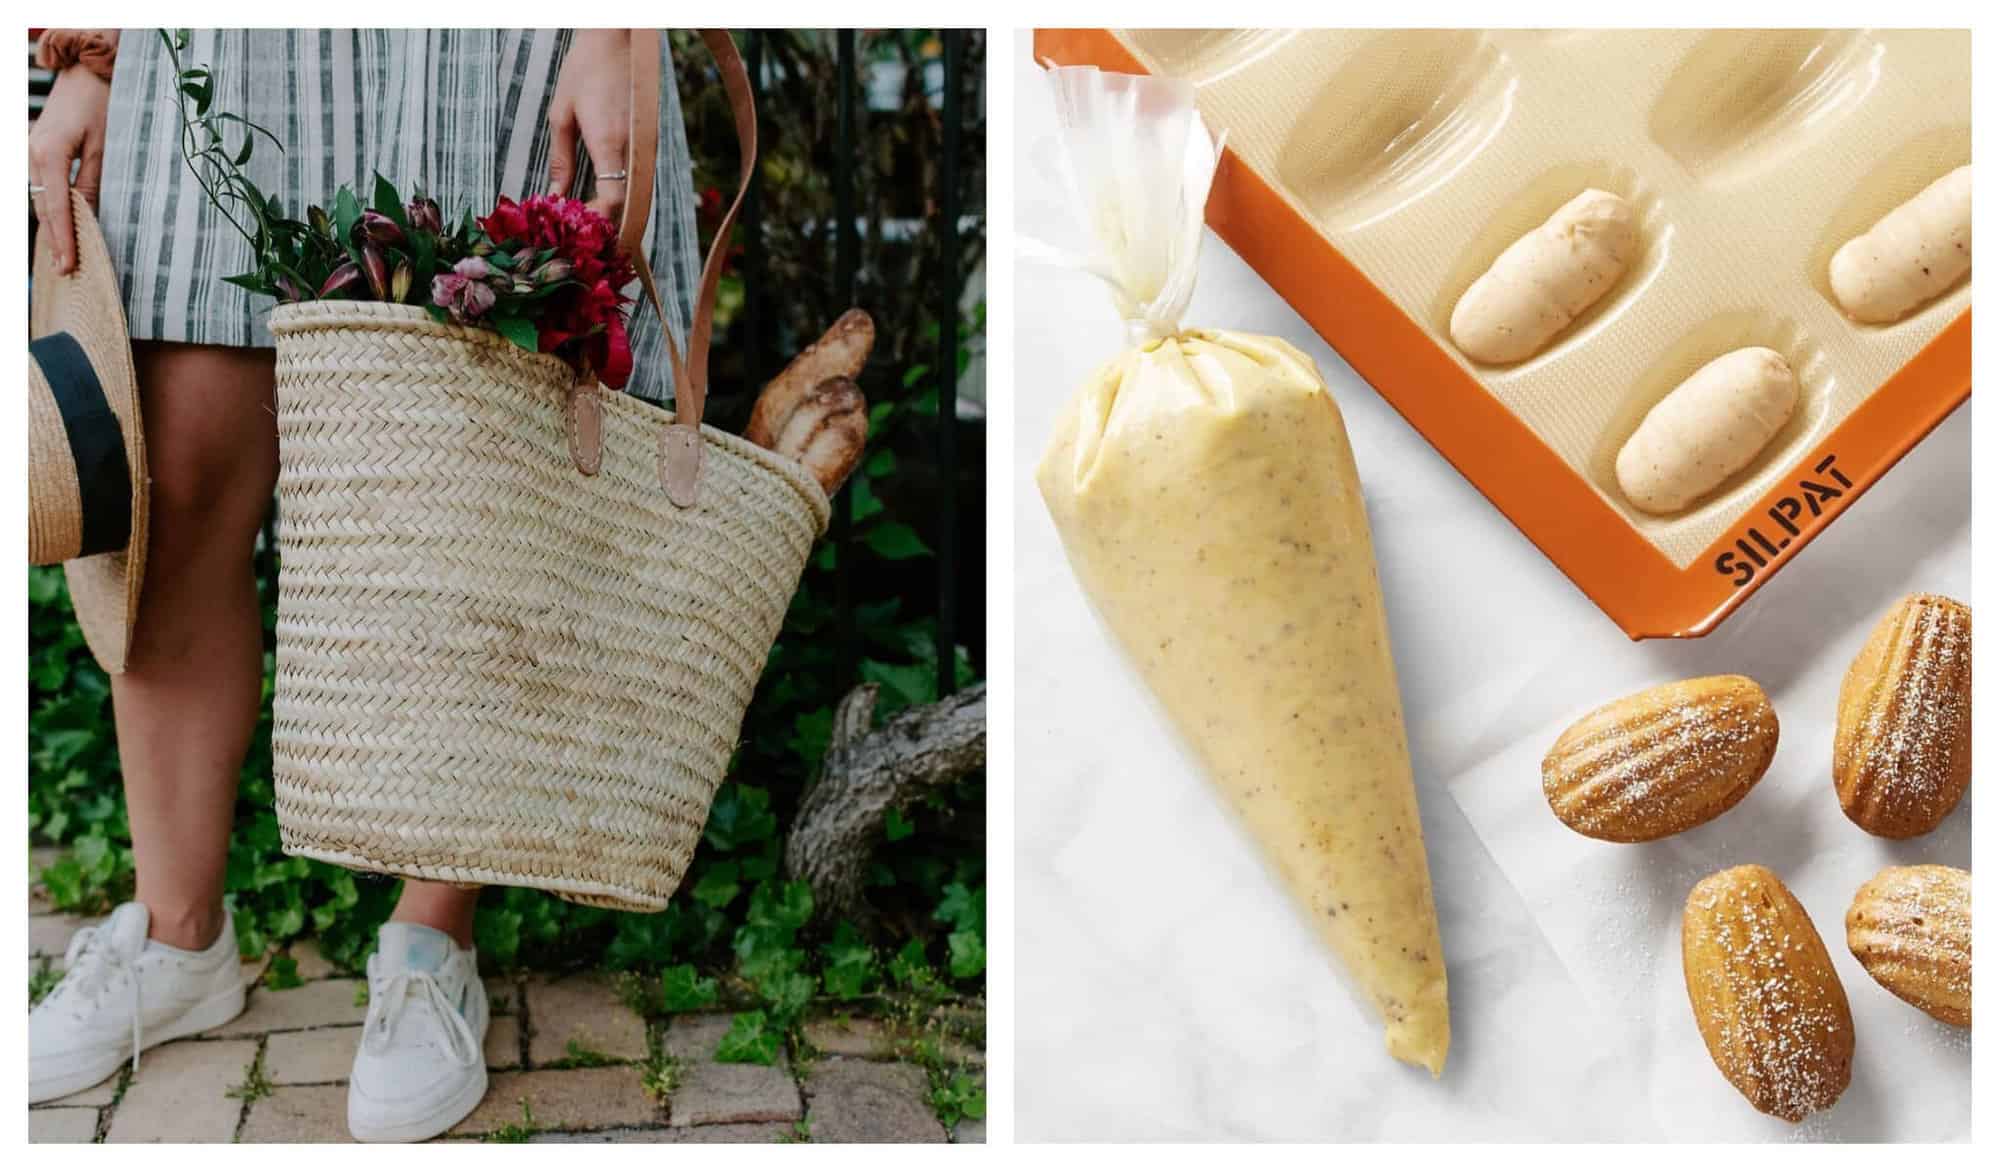 Left: A woman in a stripy dress holds a woven basket-style bag with two baguettes inside. Right: An orange Silpat mould sits to the left of a piping-bag full of madeleine mixture